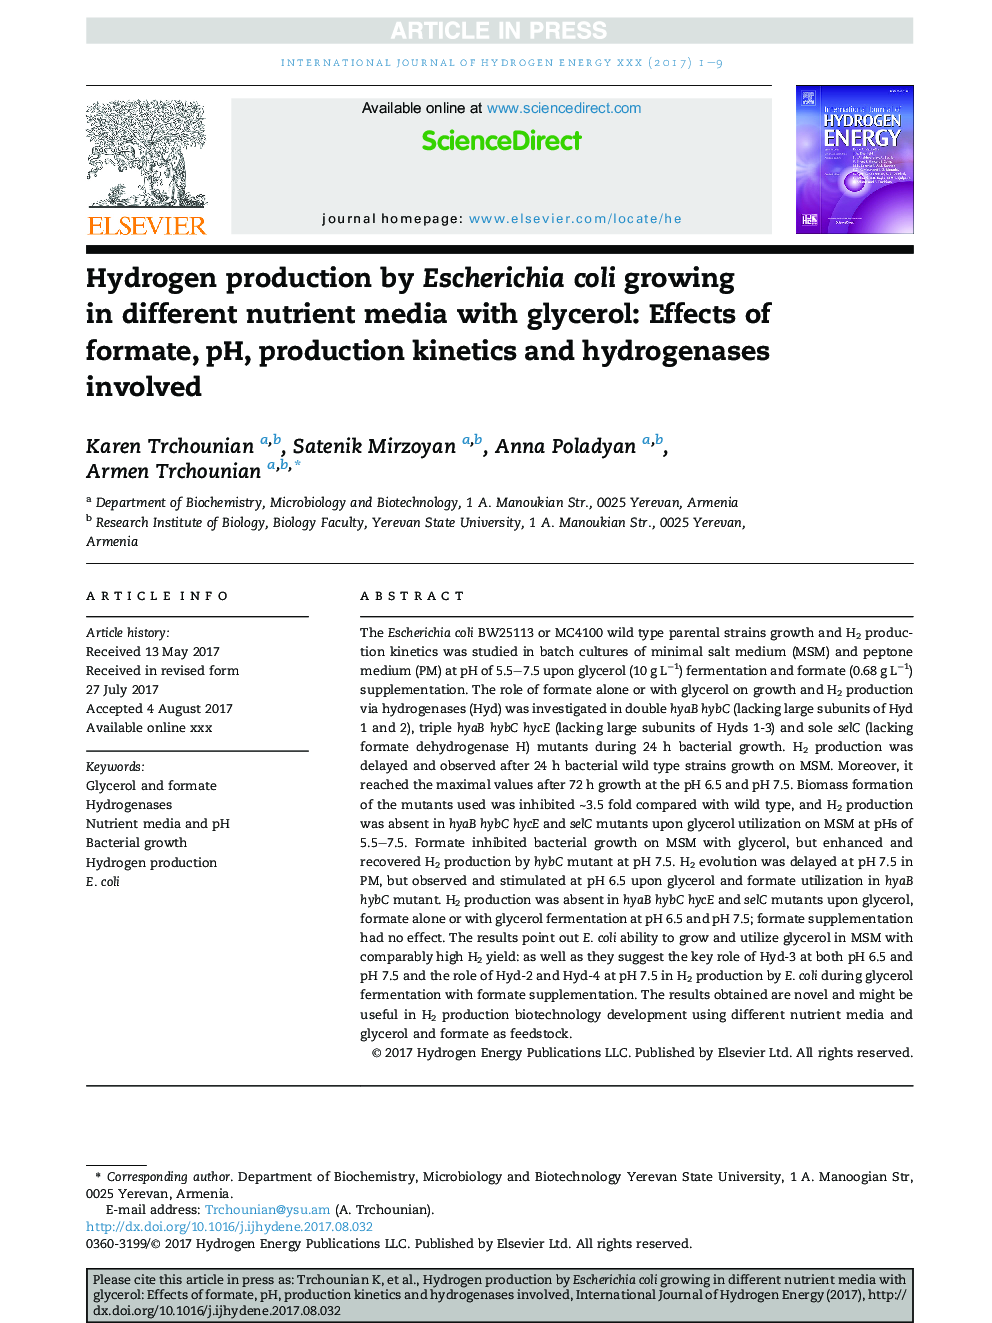 Hydrogen production by Escherichia coli growing inÂ different nutrient media with glycerol: Effects of formate, pH, production kinetics and hydrogenases involved